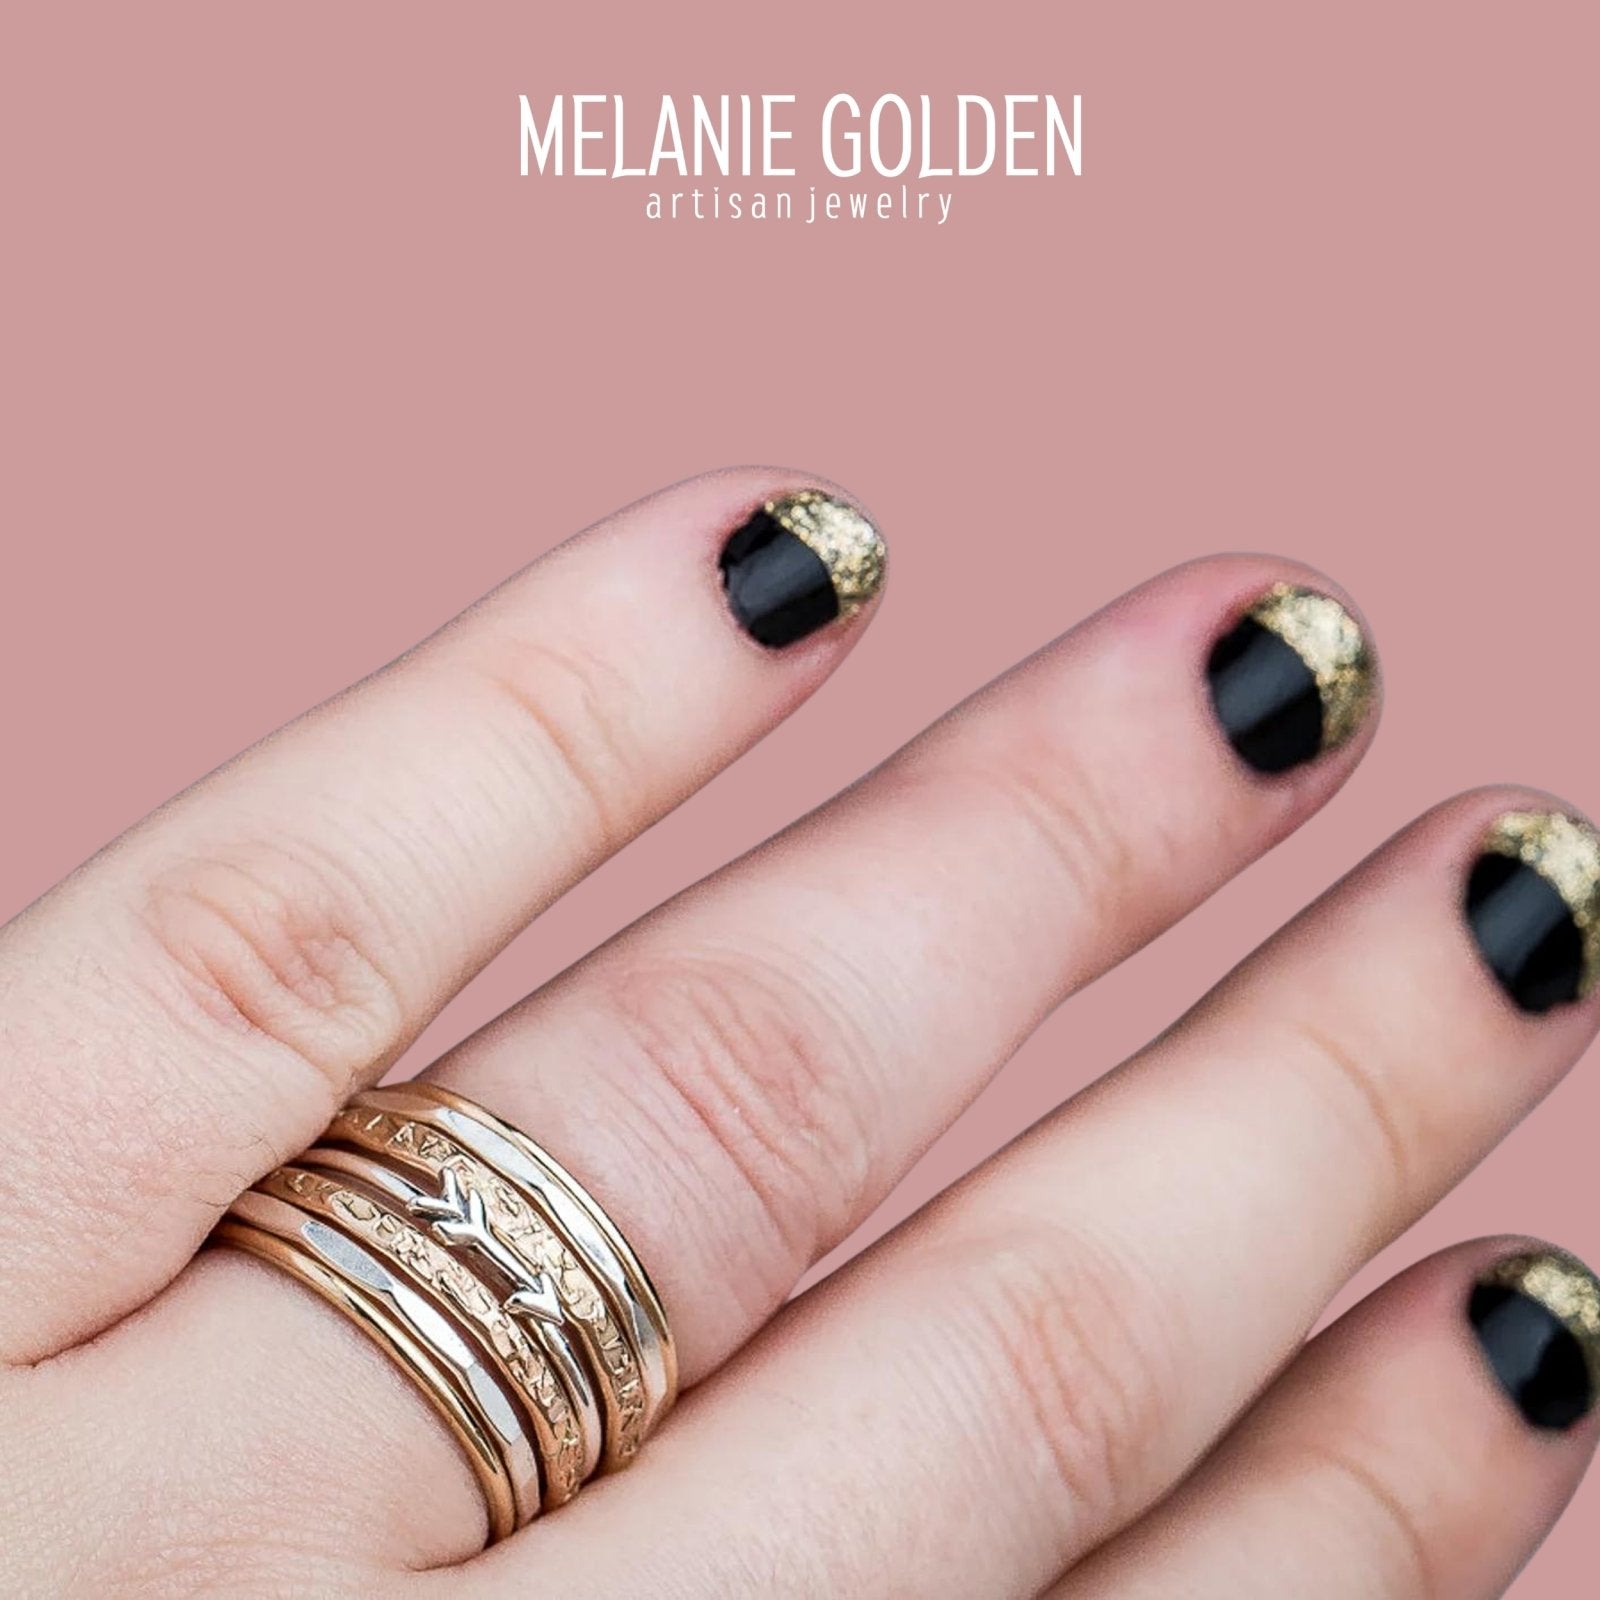 Set of 7 Arrow Stacking Rings - Melanie Golden Jewelry - mixed metal, rings, stacking rings